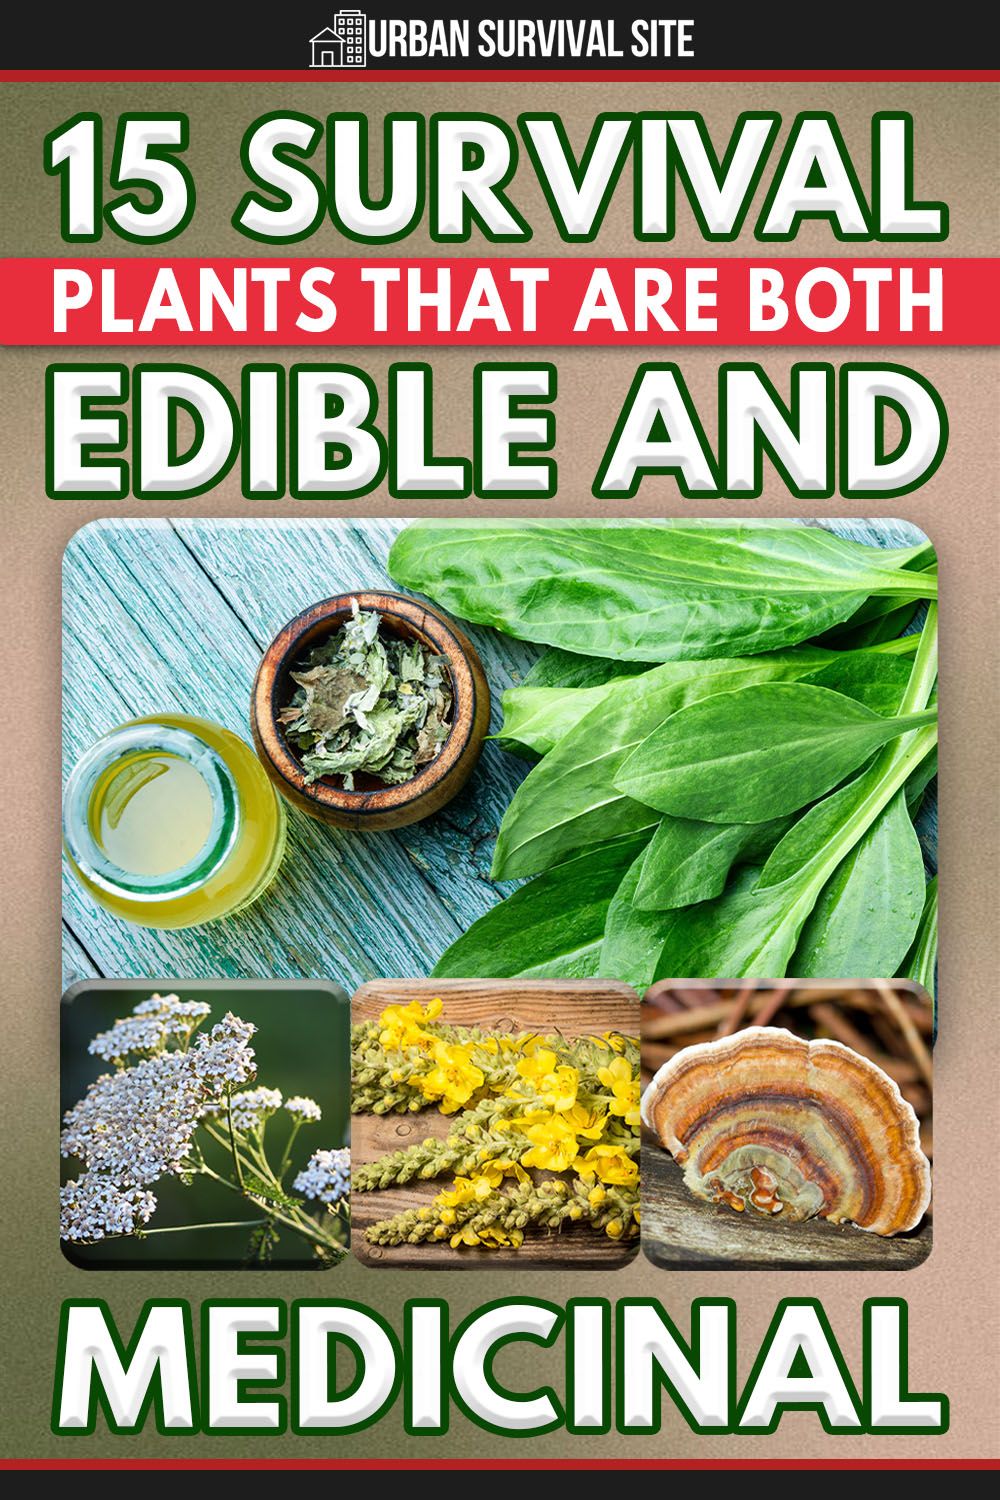 15 Survival Plants That Are Both Edible AND Medicinal